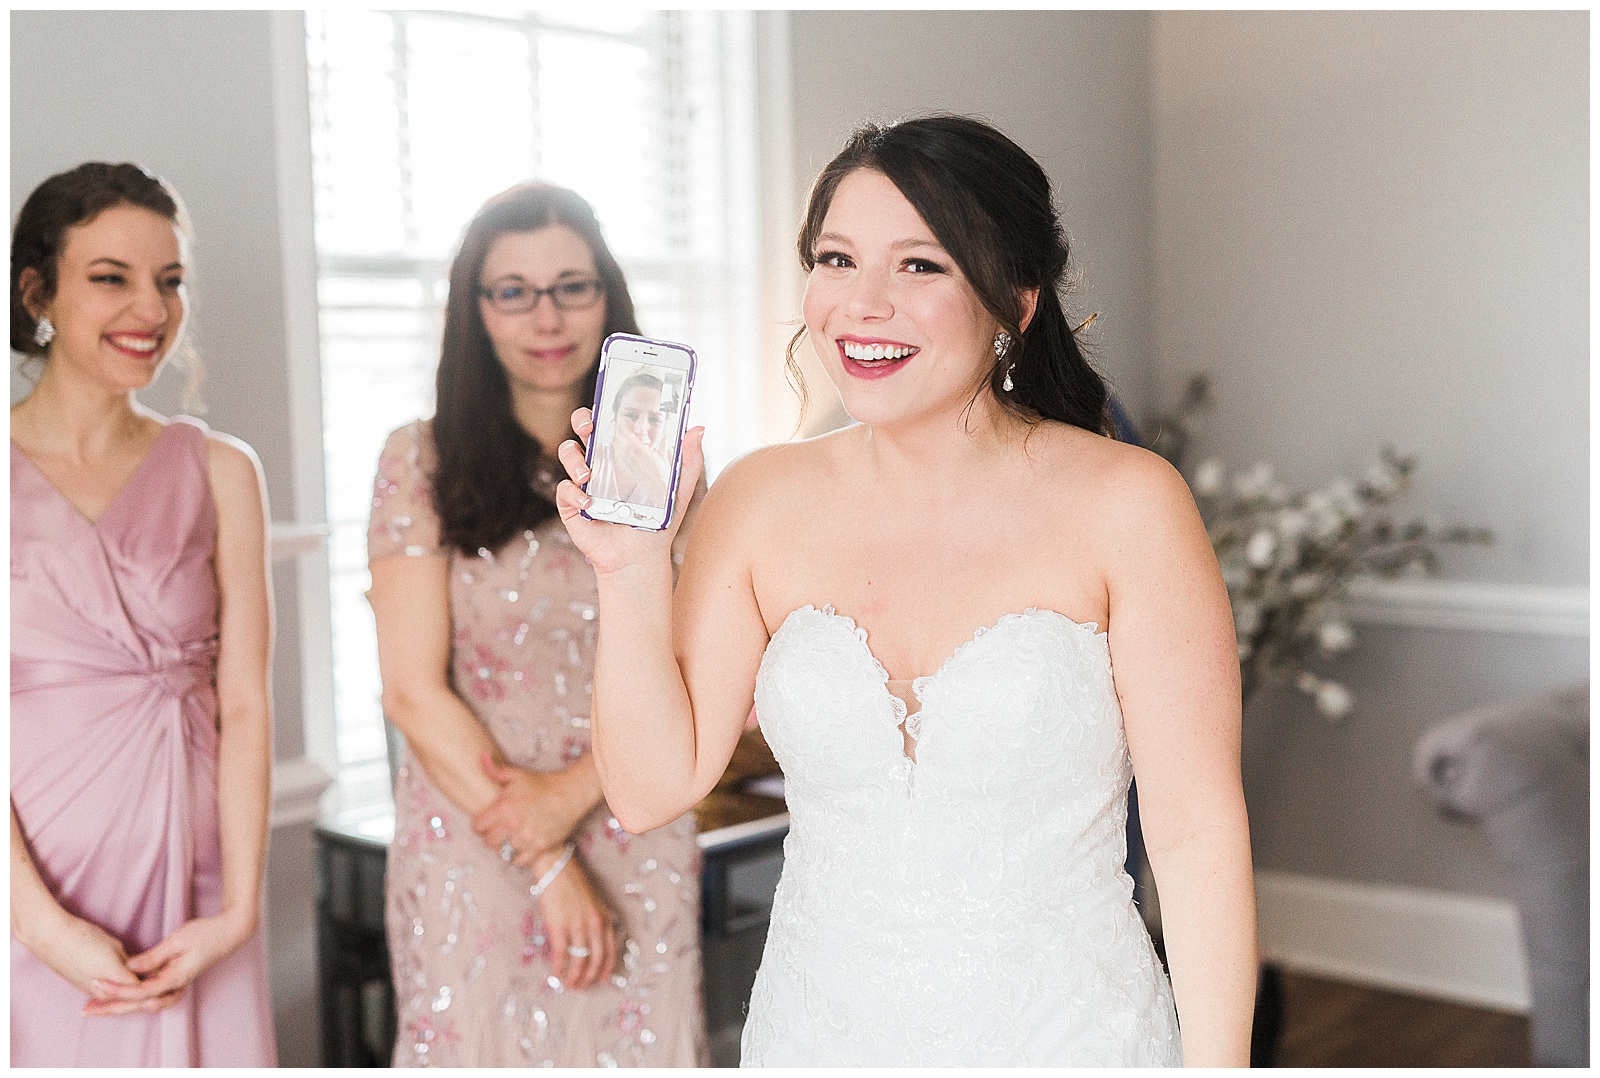 Bridesmaid First Look from Light and Airy Outdoor Wedding at Separk Mansion in Gastonia, NC | Kevyn Dixon Photography